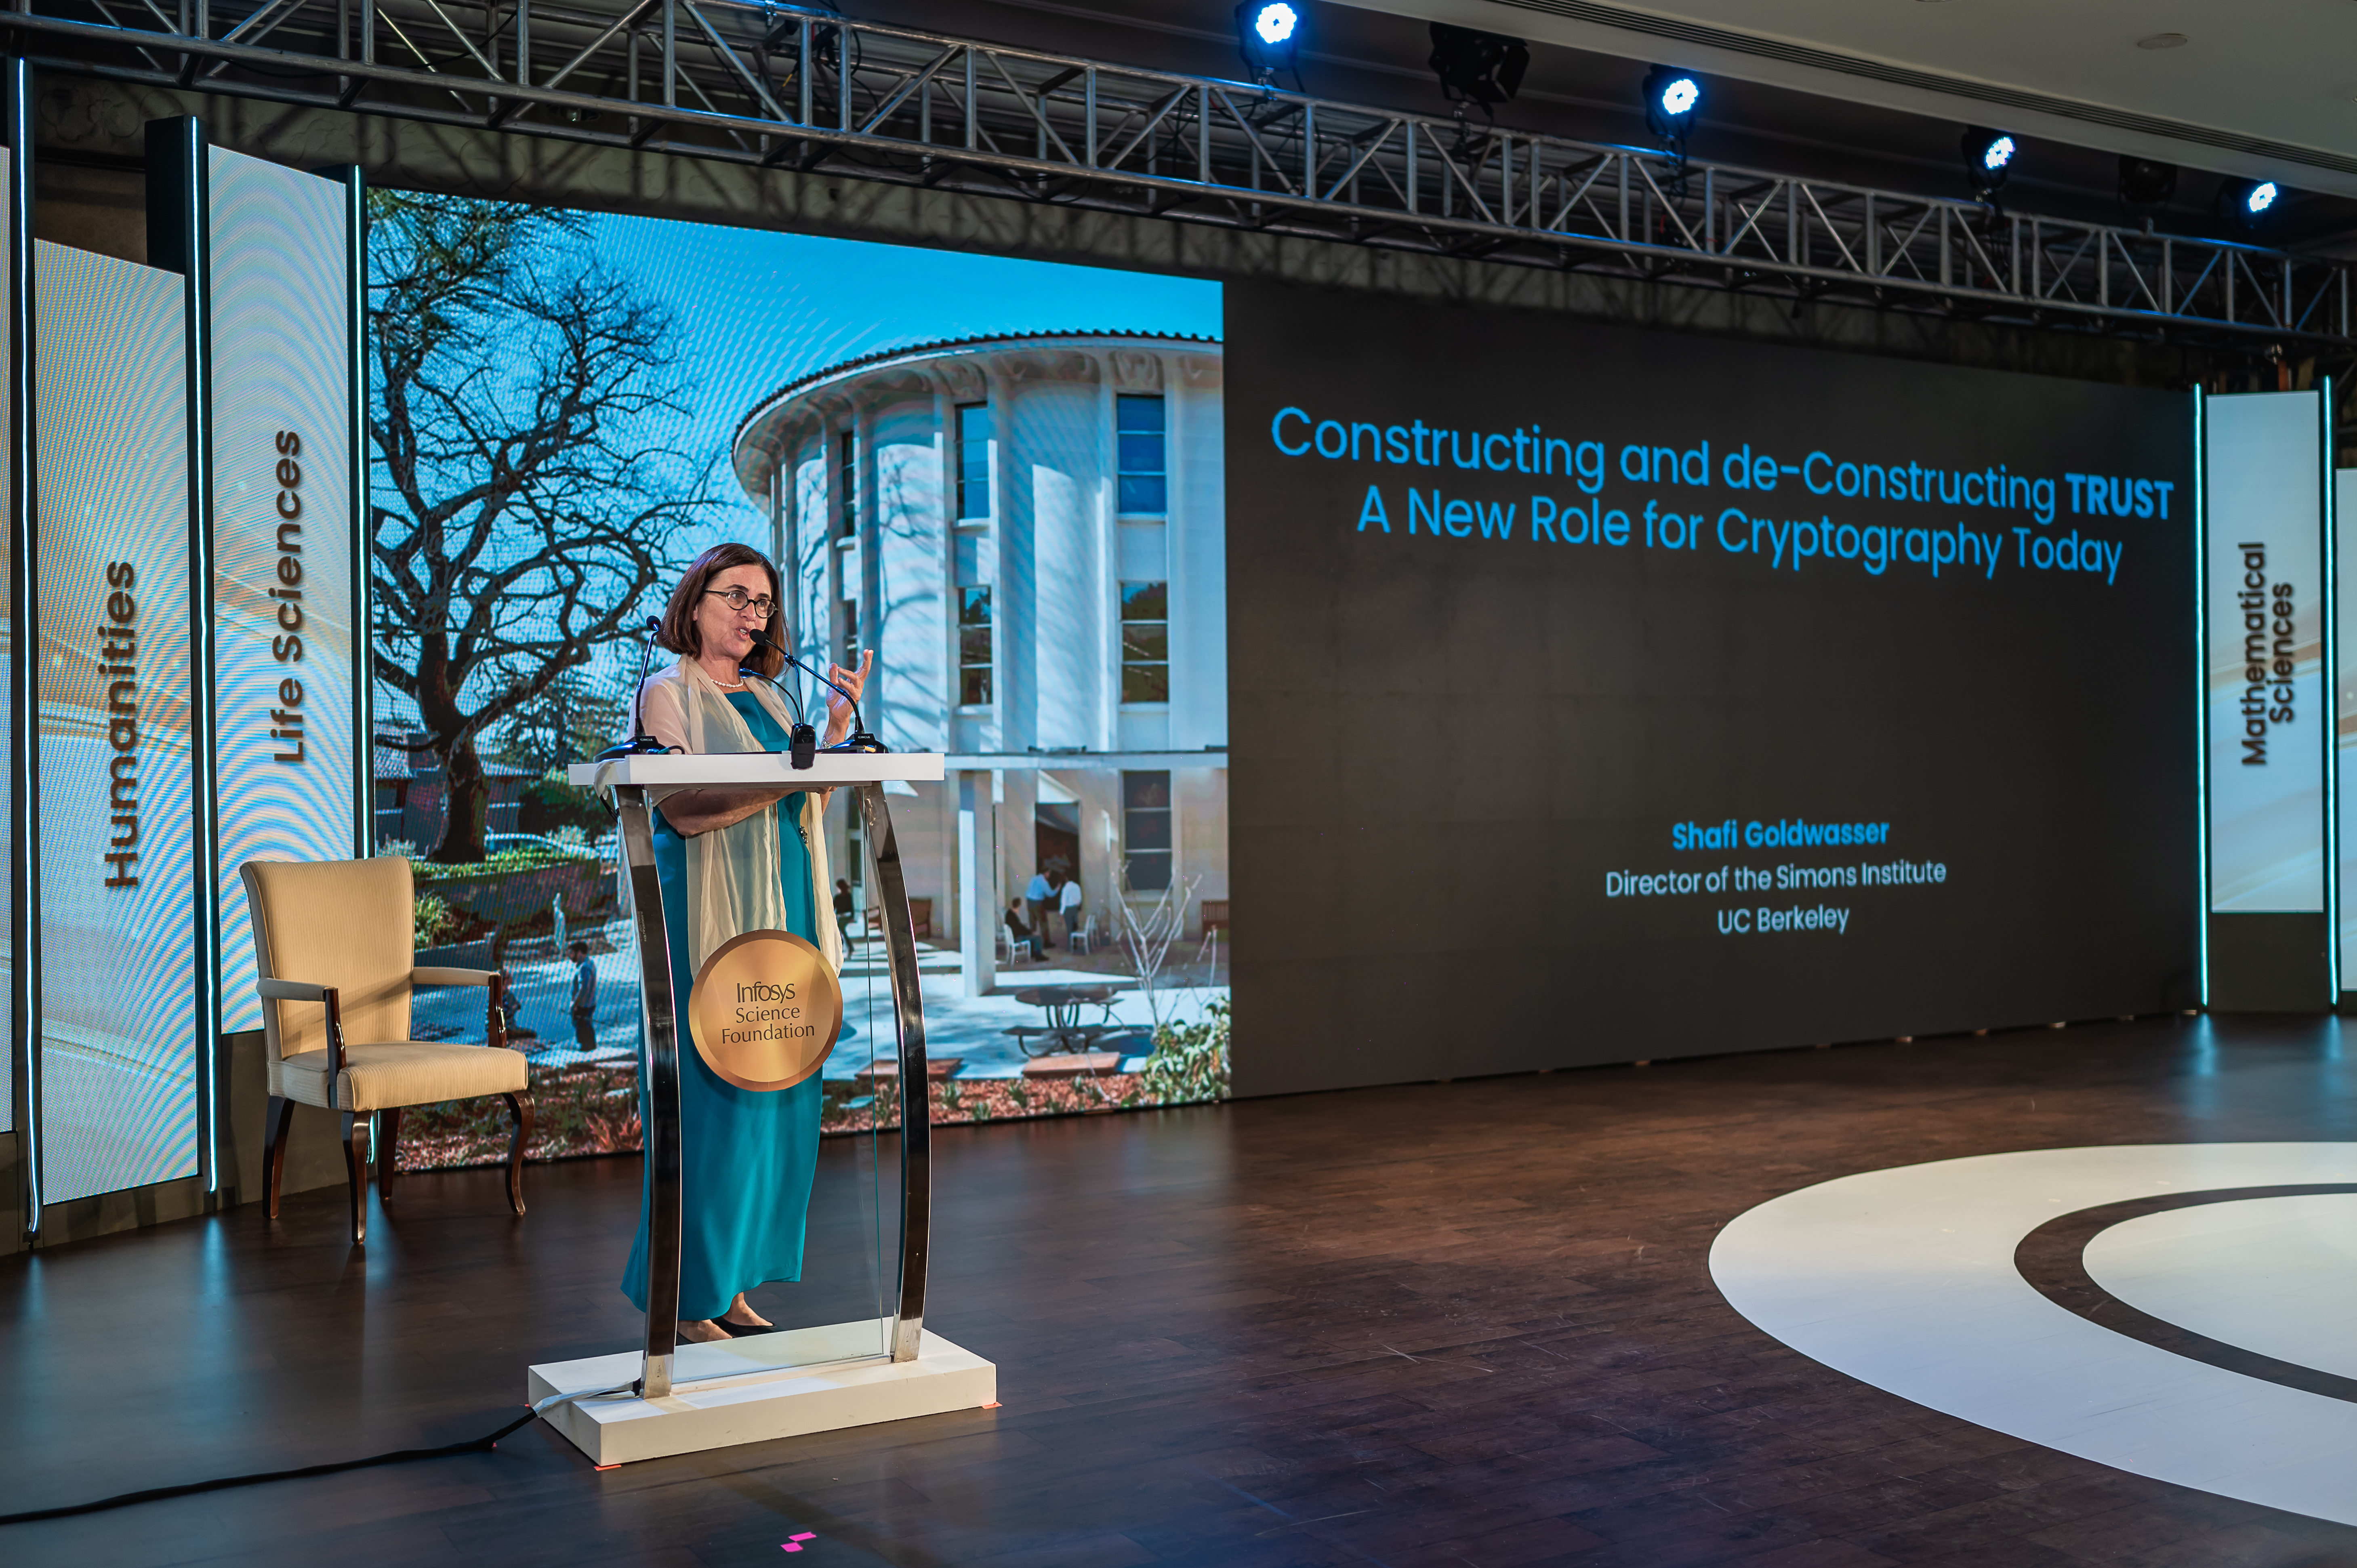 Prof. Shafi Goldwasser delivering the Chief Guest Address titled 'Constructing and Deconstructing Trust: A New Role for Cryptography Today'